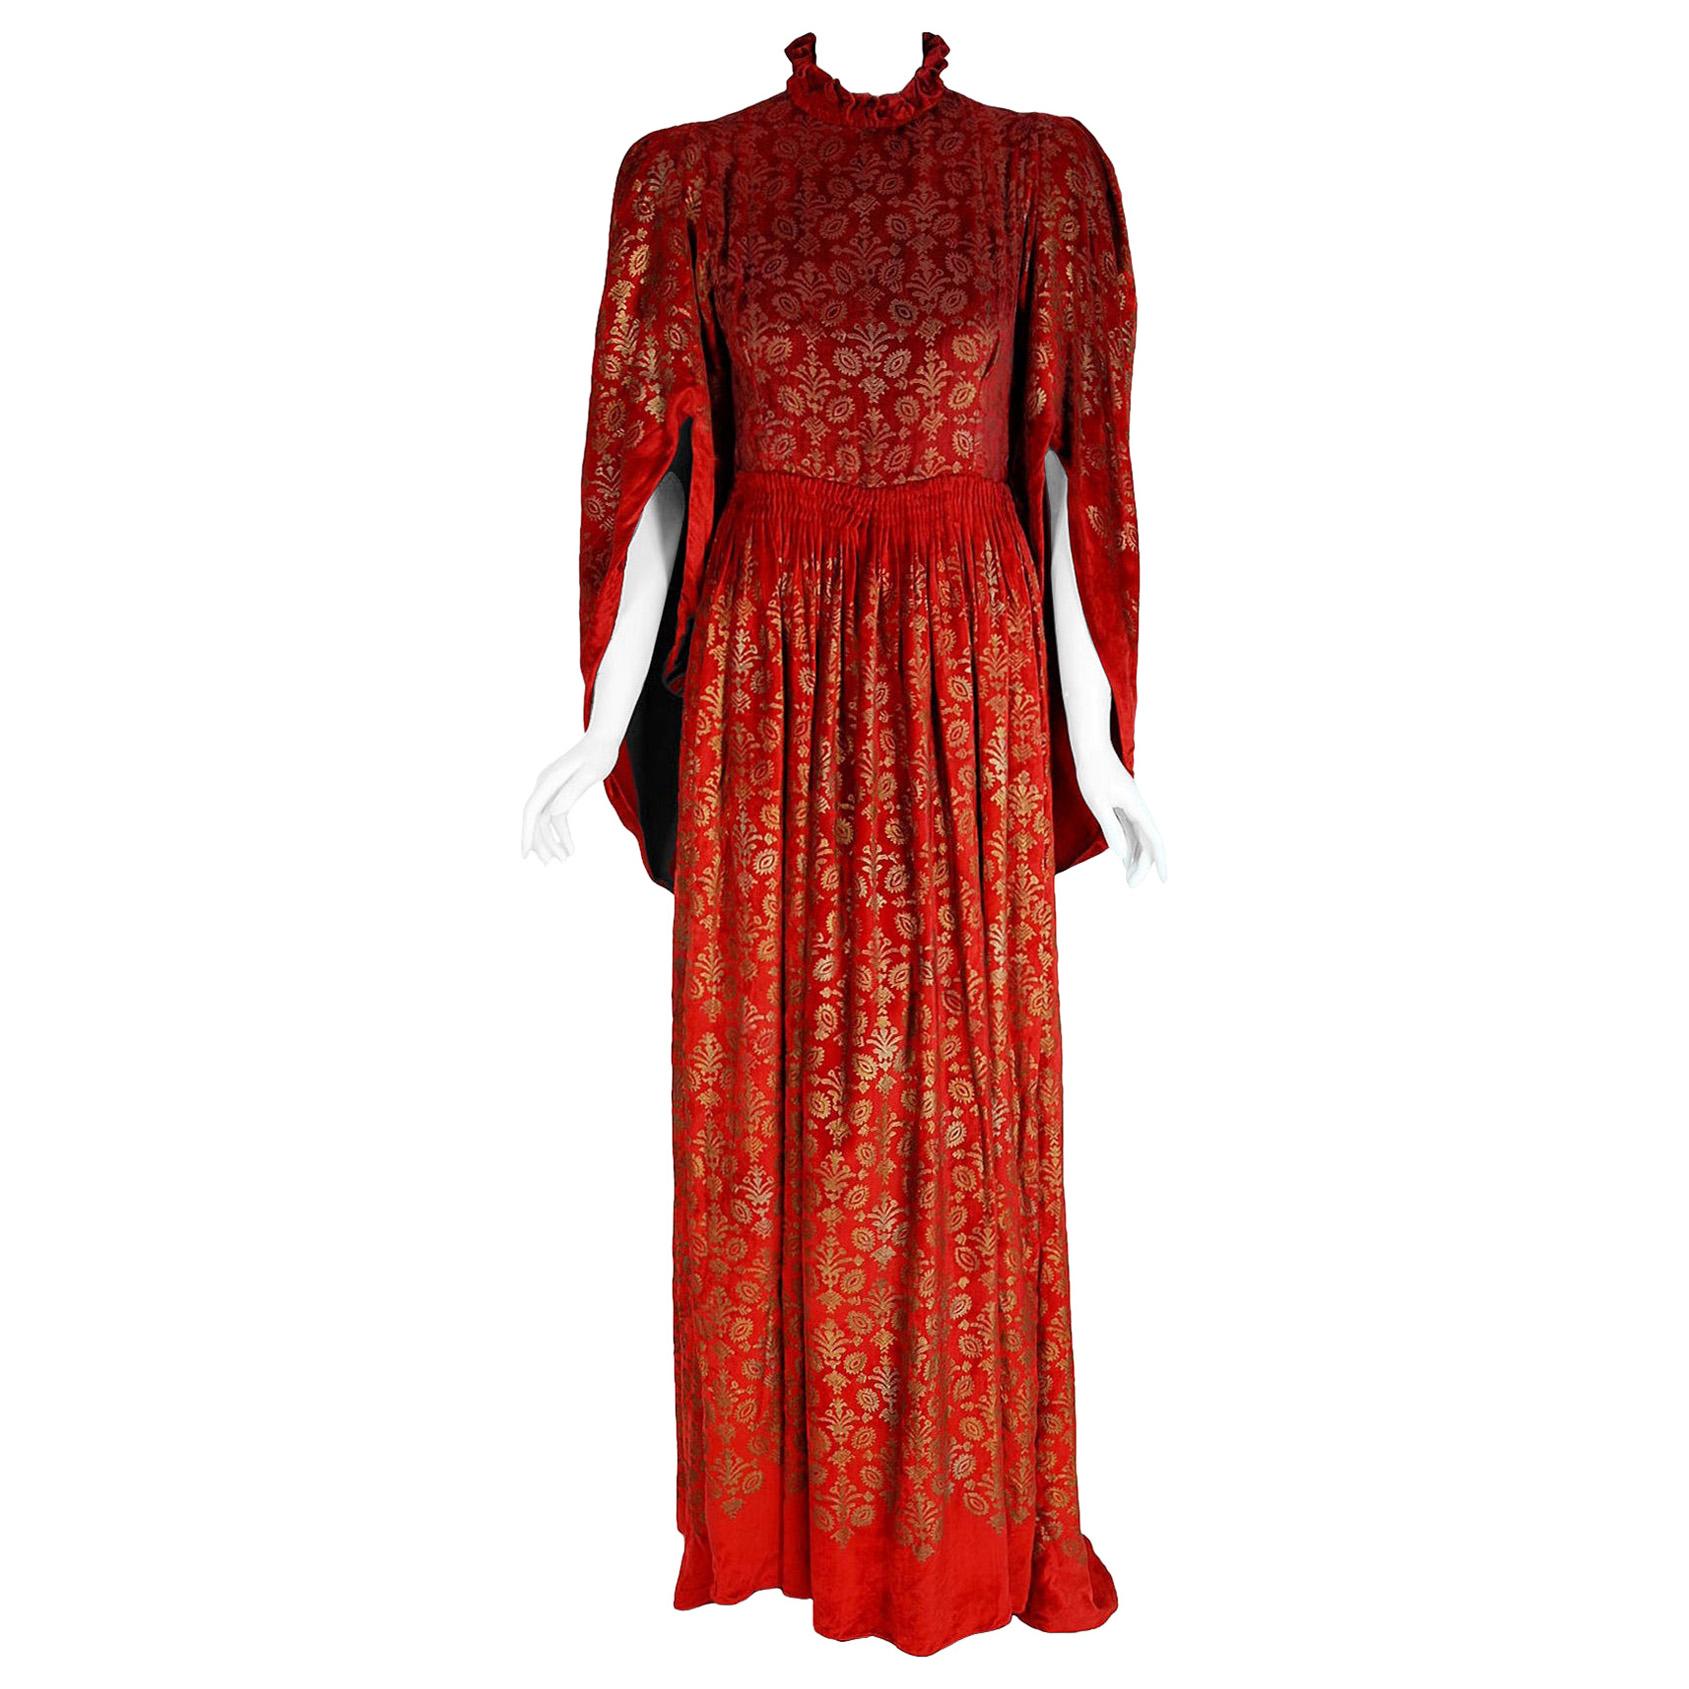 Vintage 1920's Gallenga Couture Metallic Stenciled Red Velvet Angel-Sleeve Gown